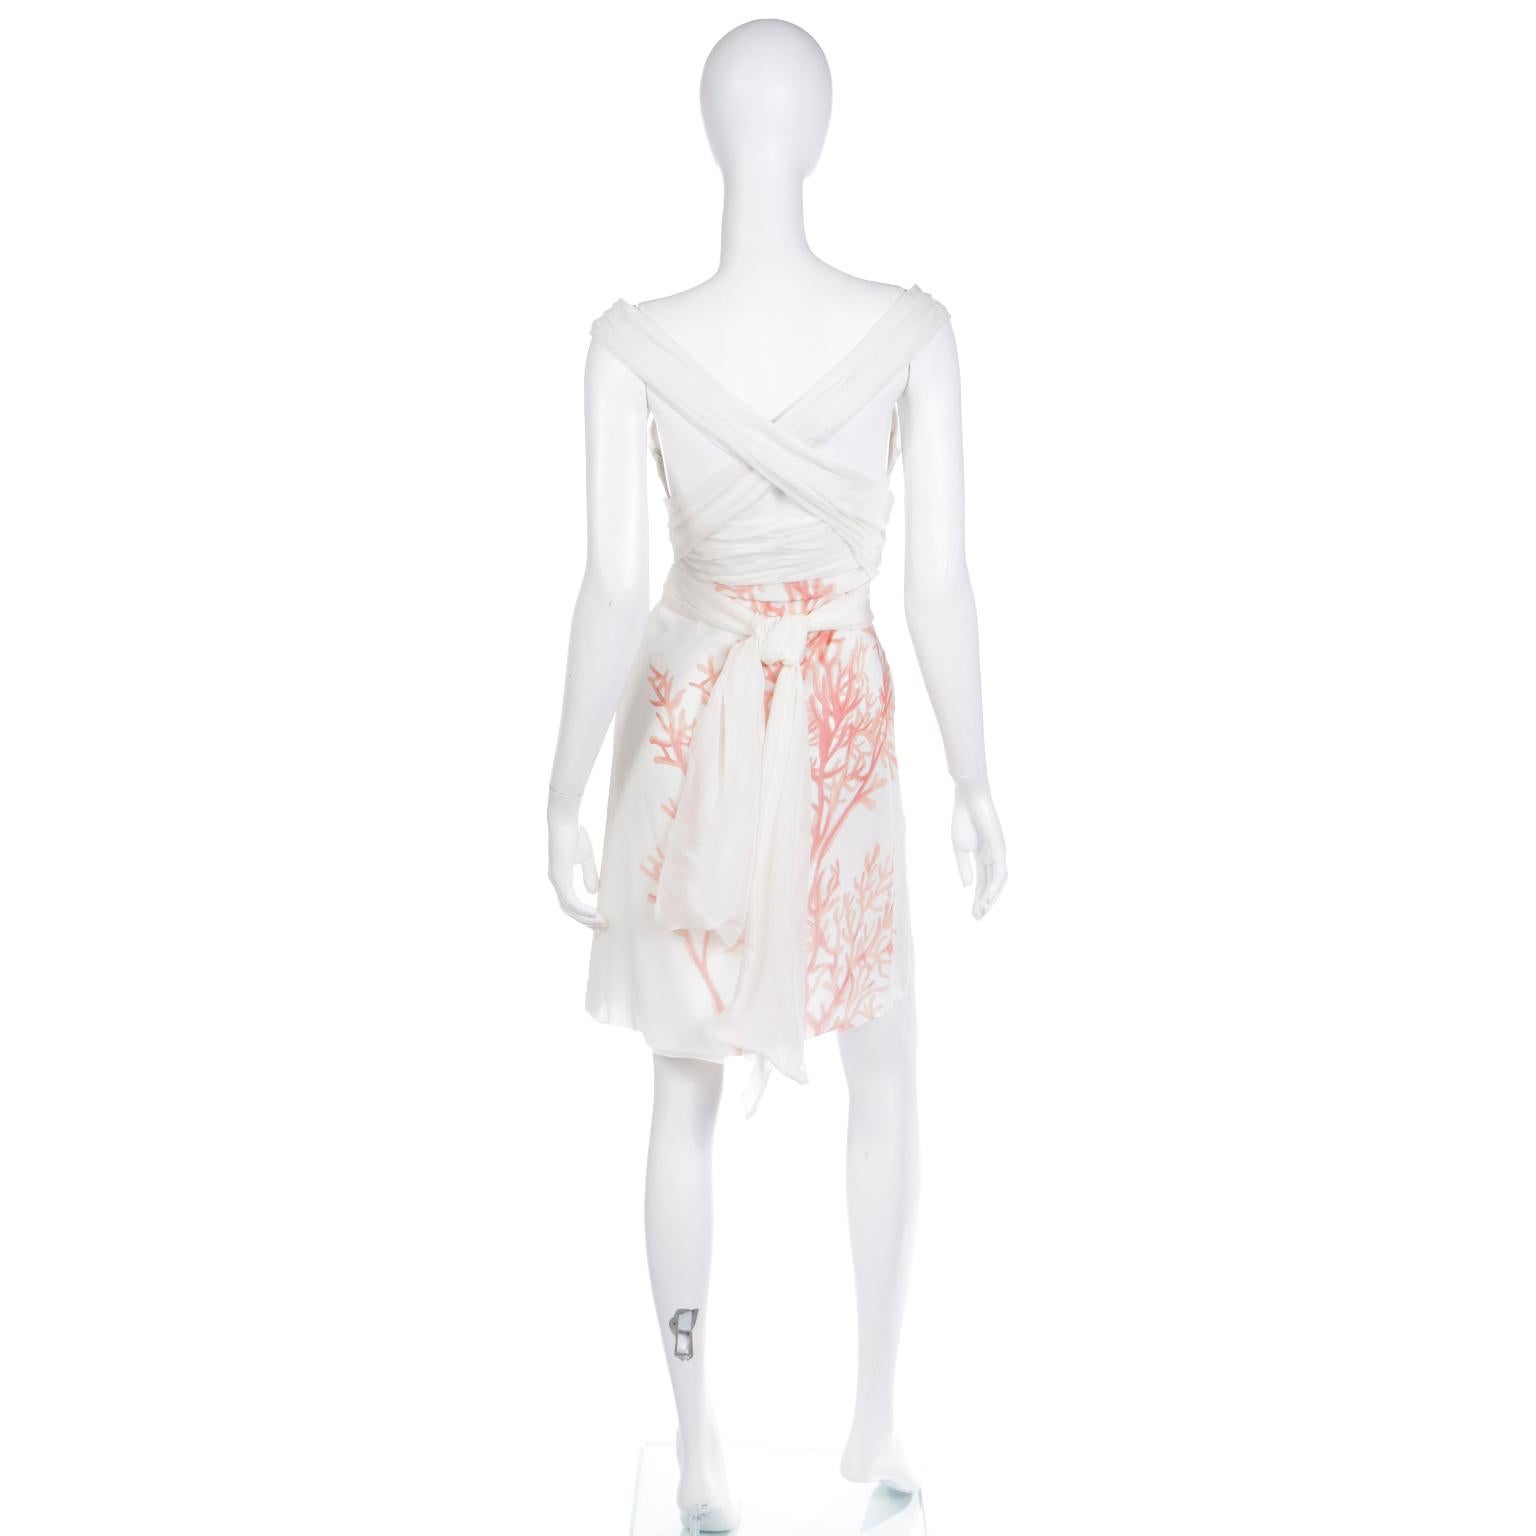 Early 2000s Valentino Ivory Silk Chiffon Coral Print Dress With Long Sash For Sale 1